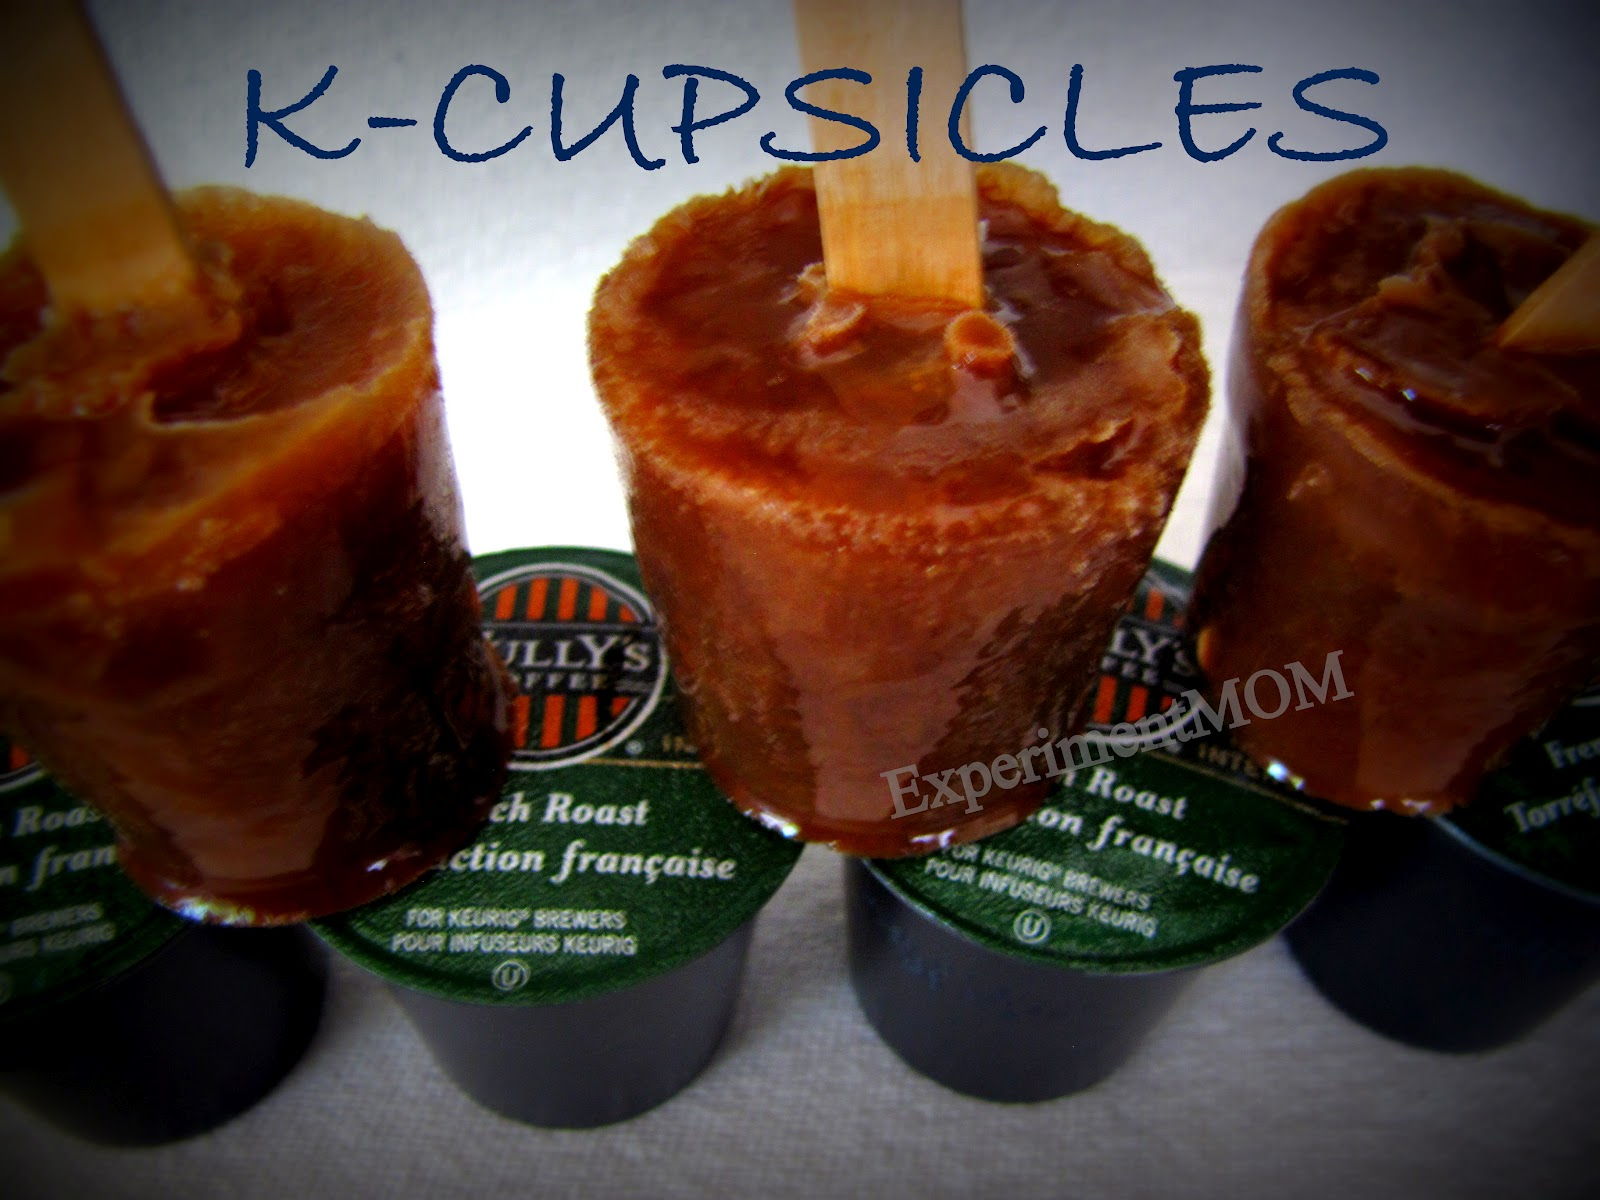 K-cupsicles